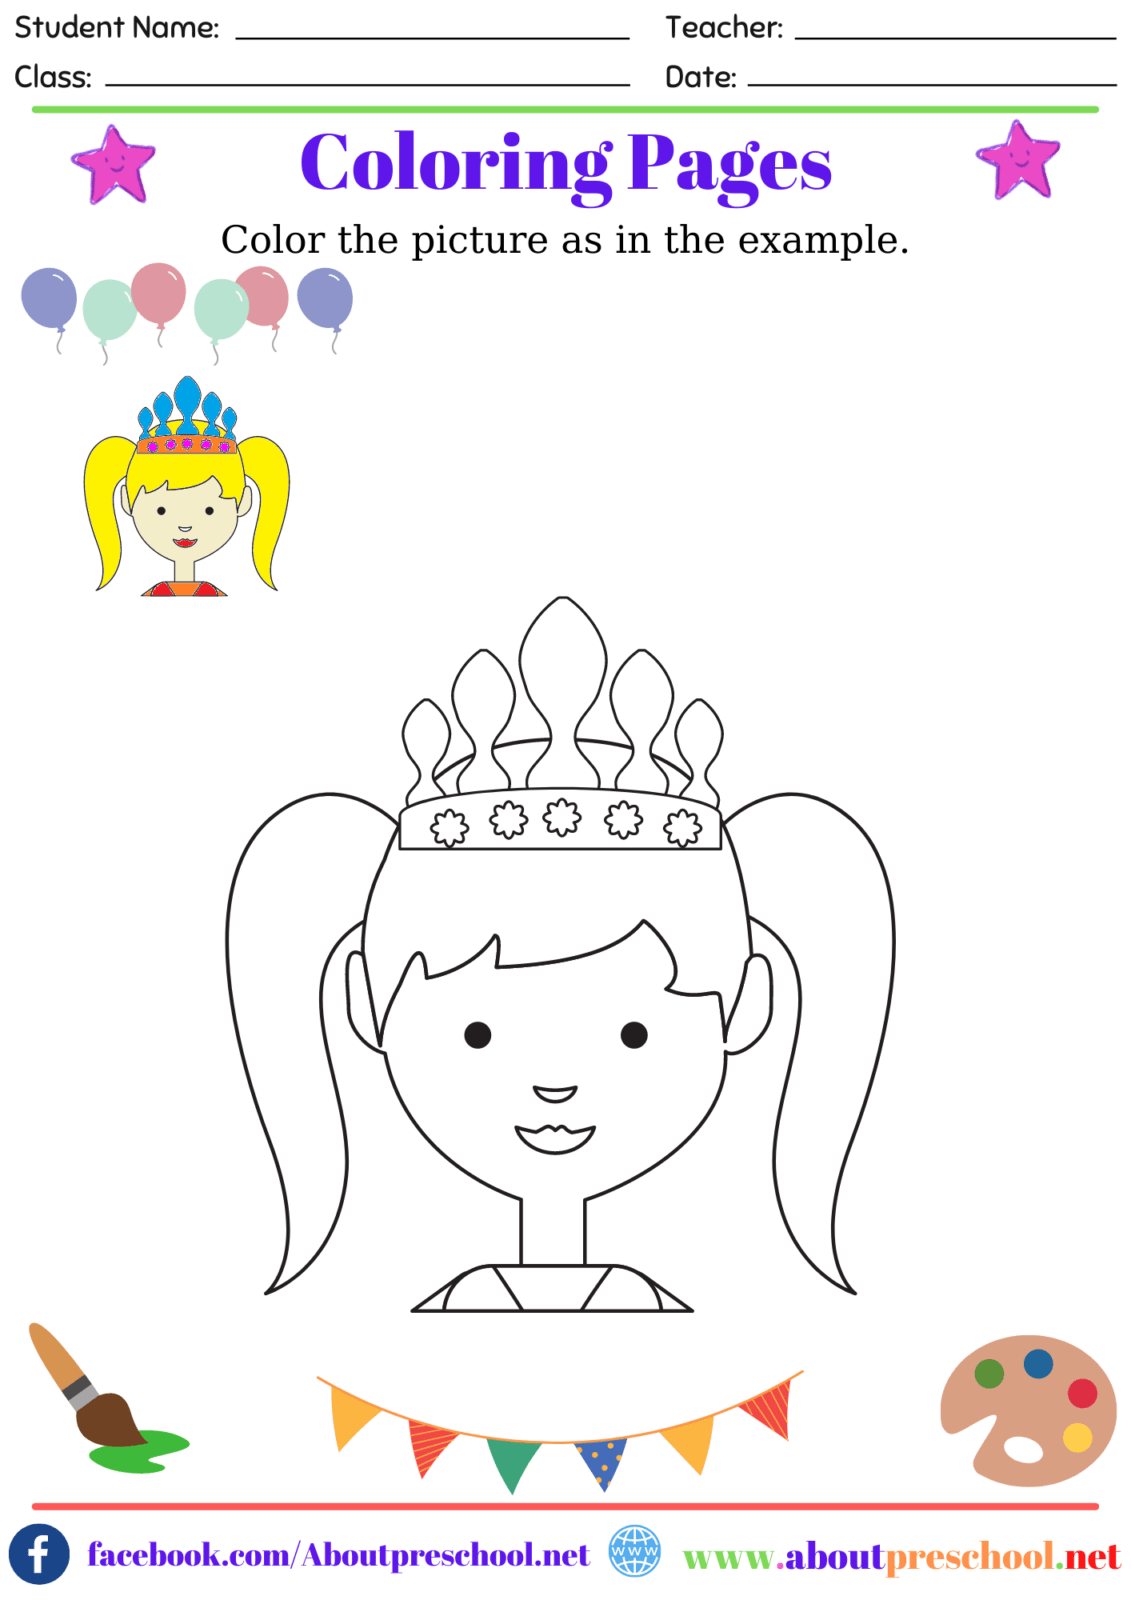 Coloring Pages 14